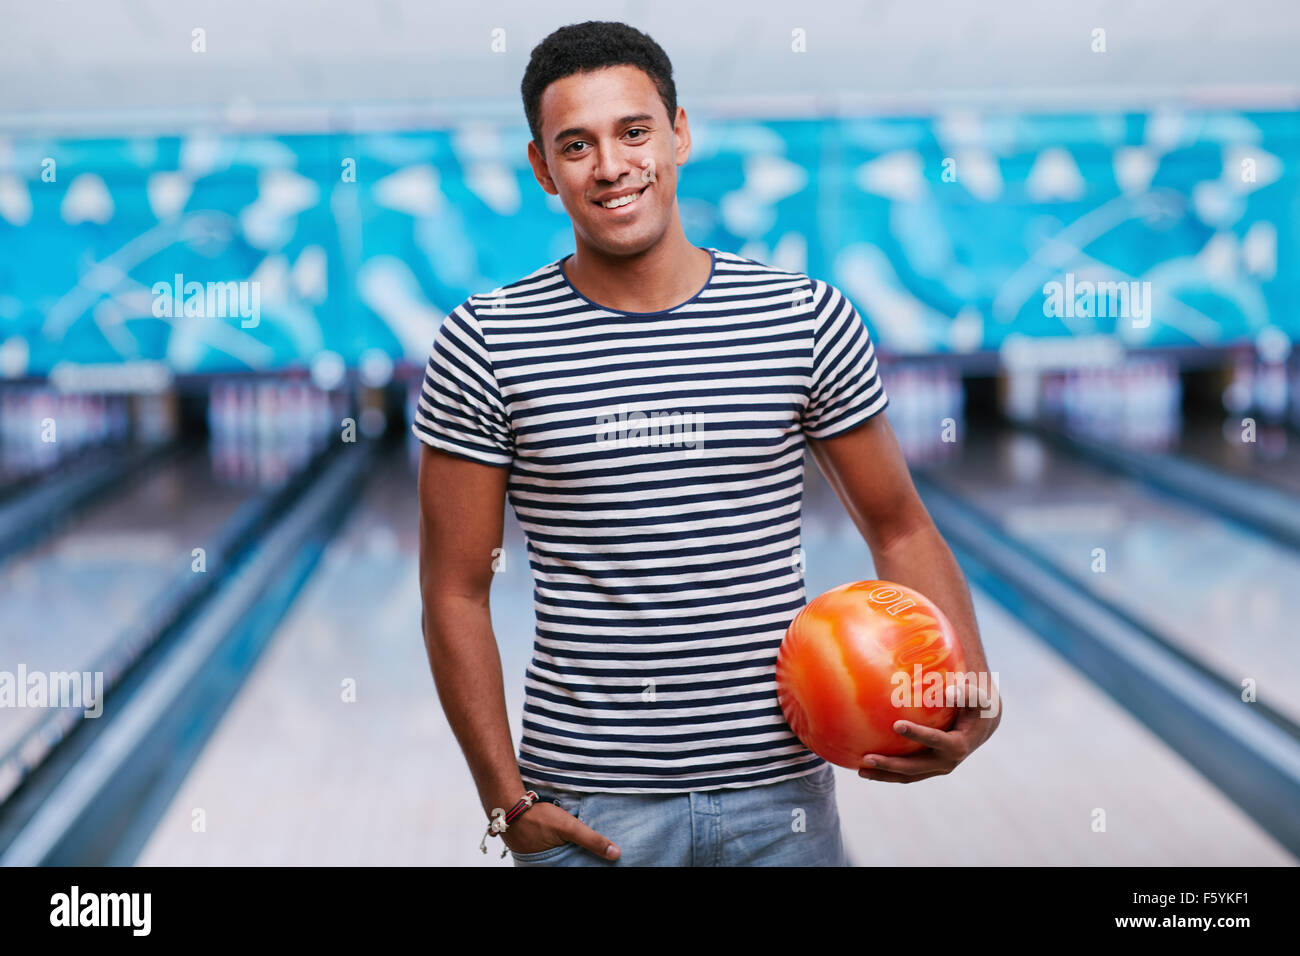 Young smiling man with ball in bowling club Stock Photo